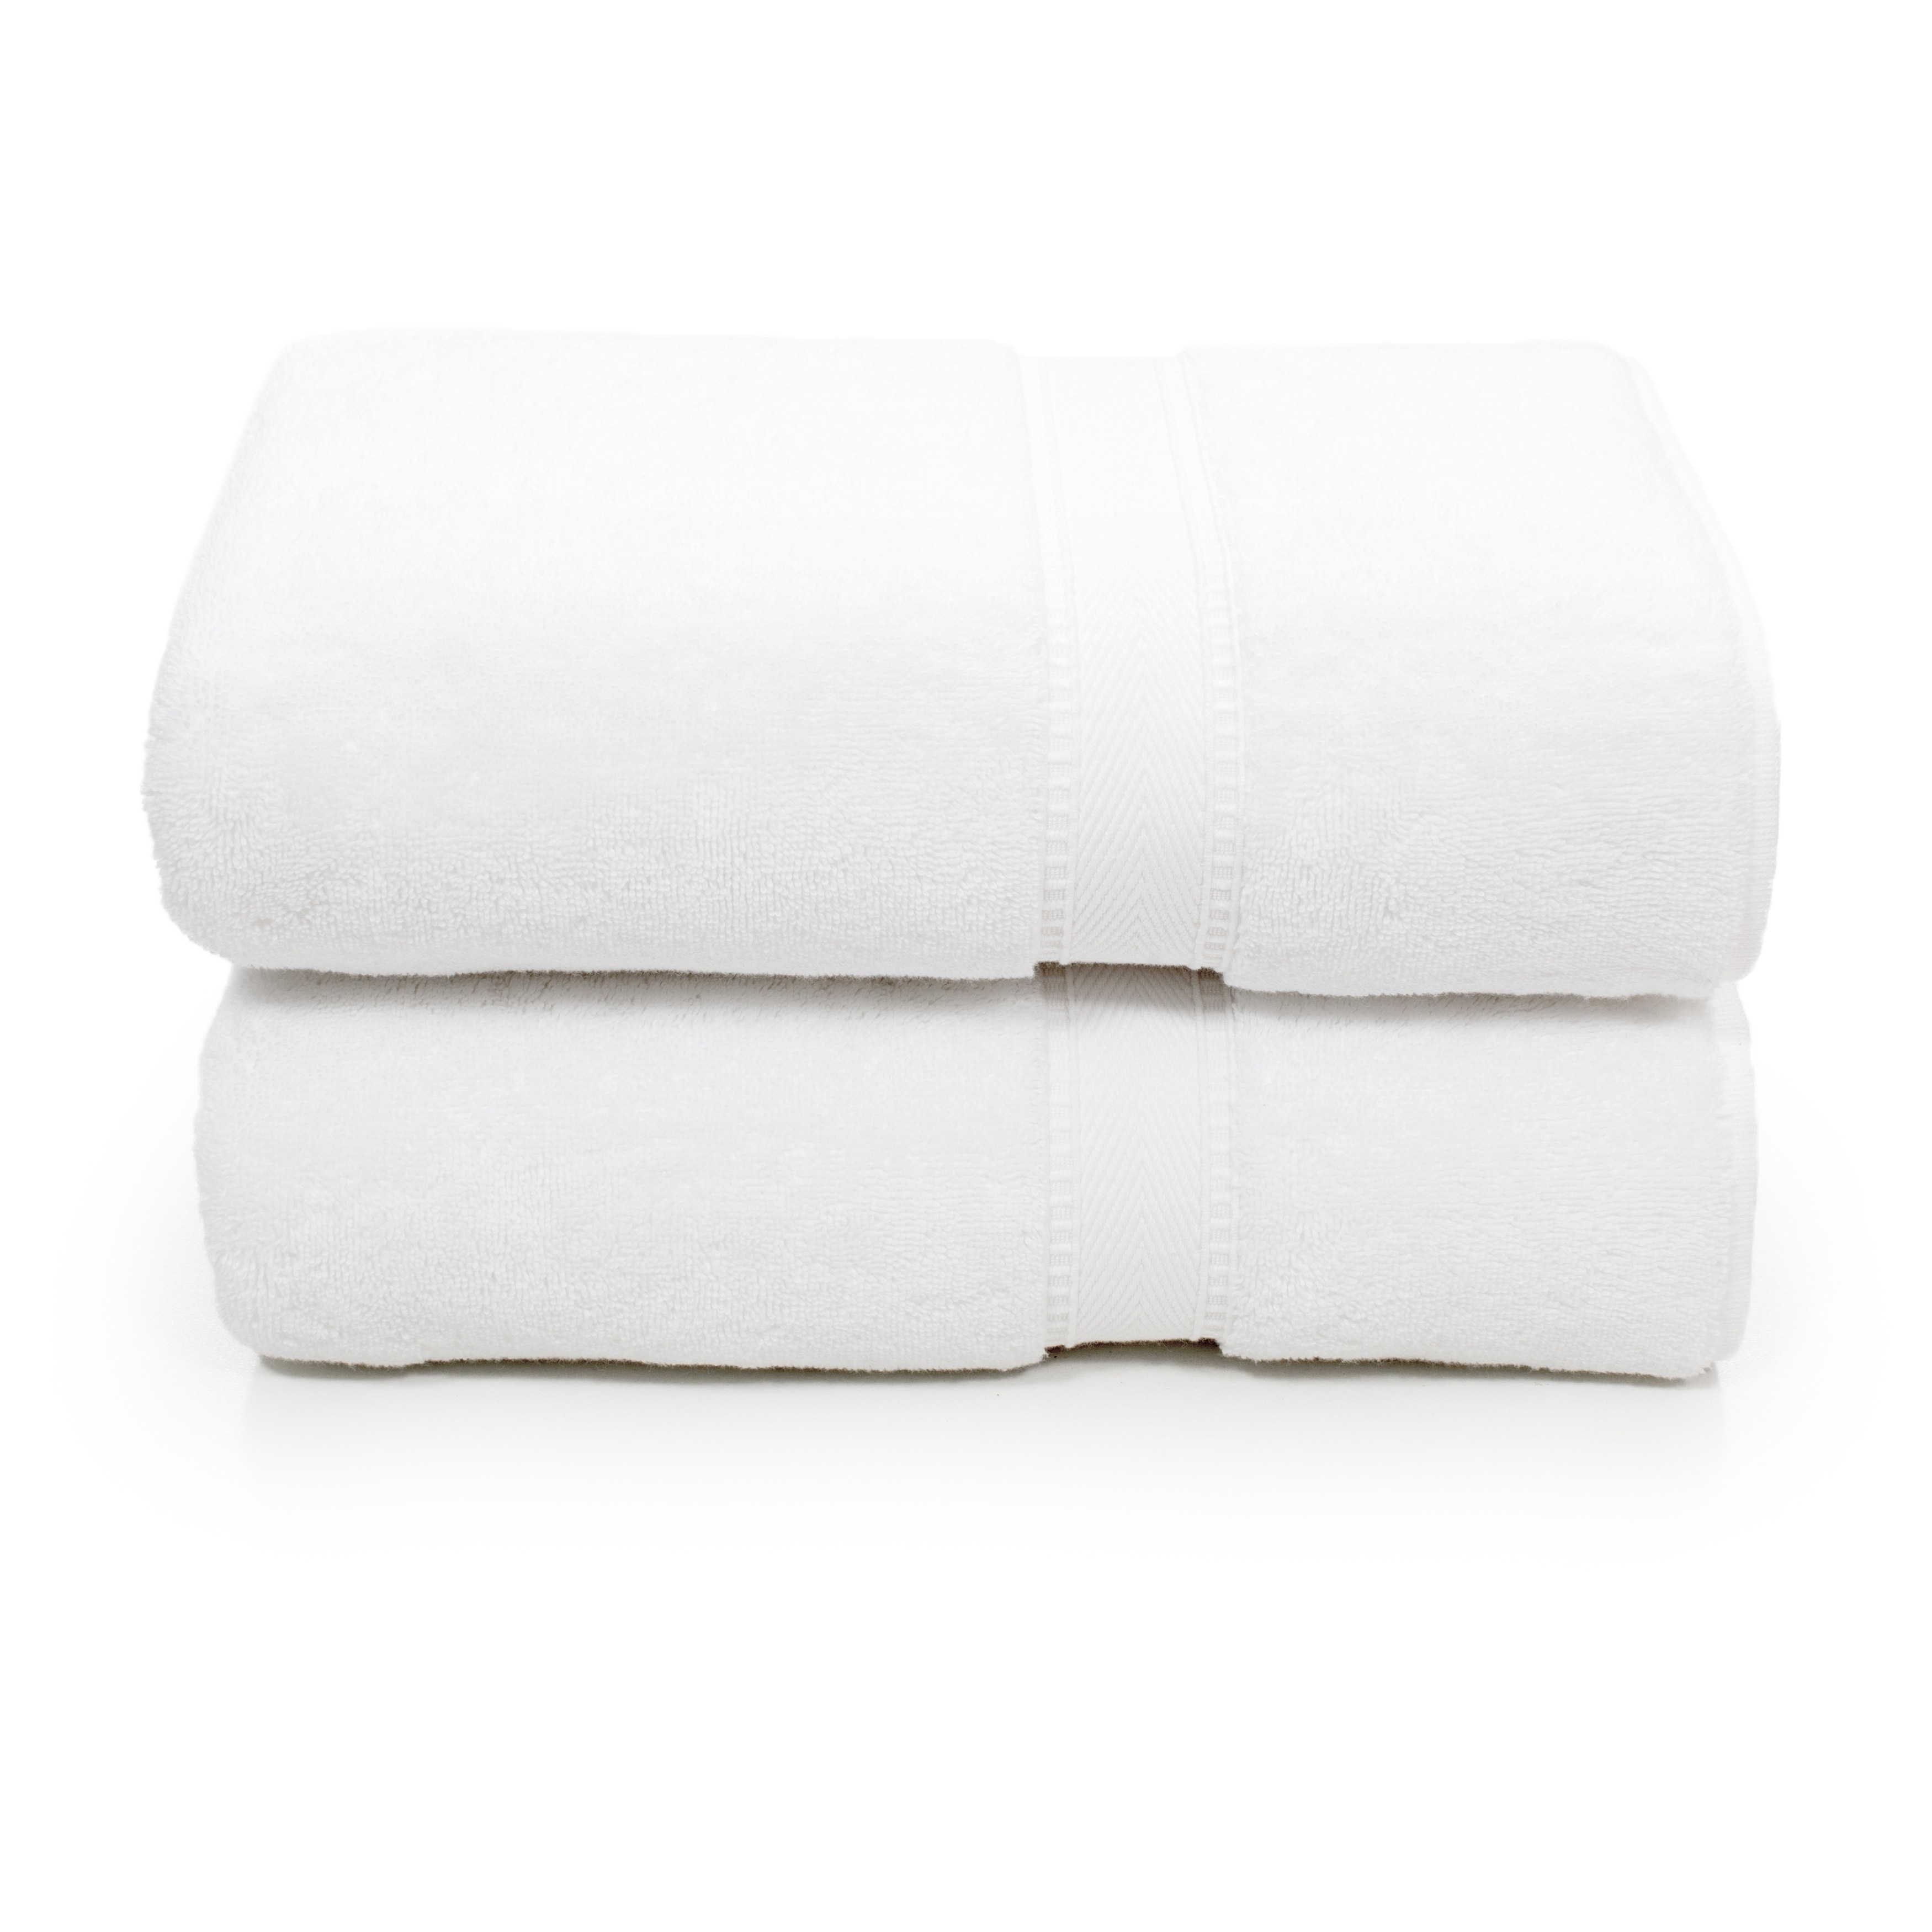 https://ak1.ostkcdn.com/images/products/is/images/direct/c938461486b3d6799a94fcc4aca1d7ae62b622fc/Authentic-Hotel-and-Spa-Turkish-Cotton-Bath-Towels-%28Set-of-2%29.jpg